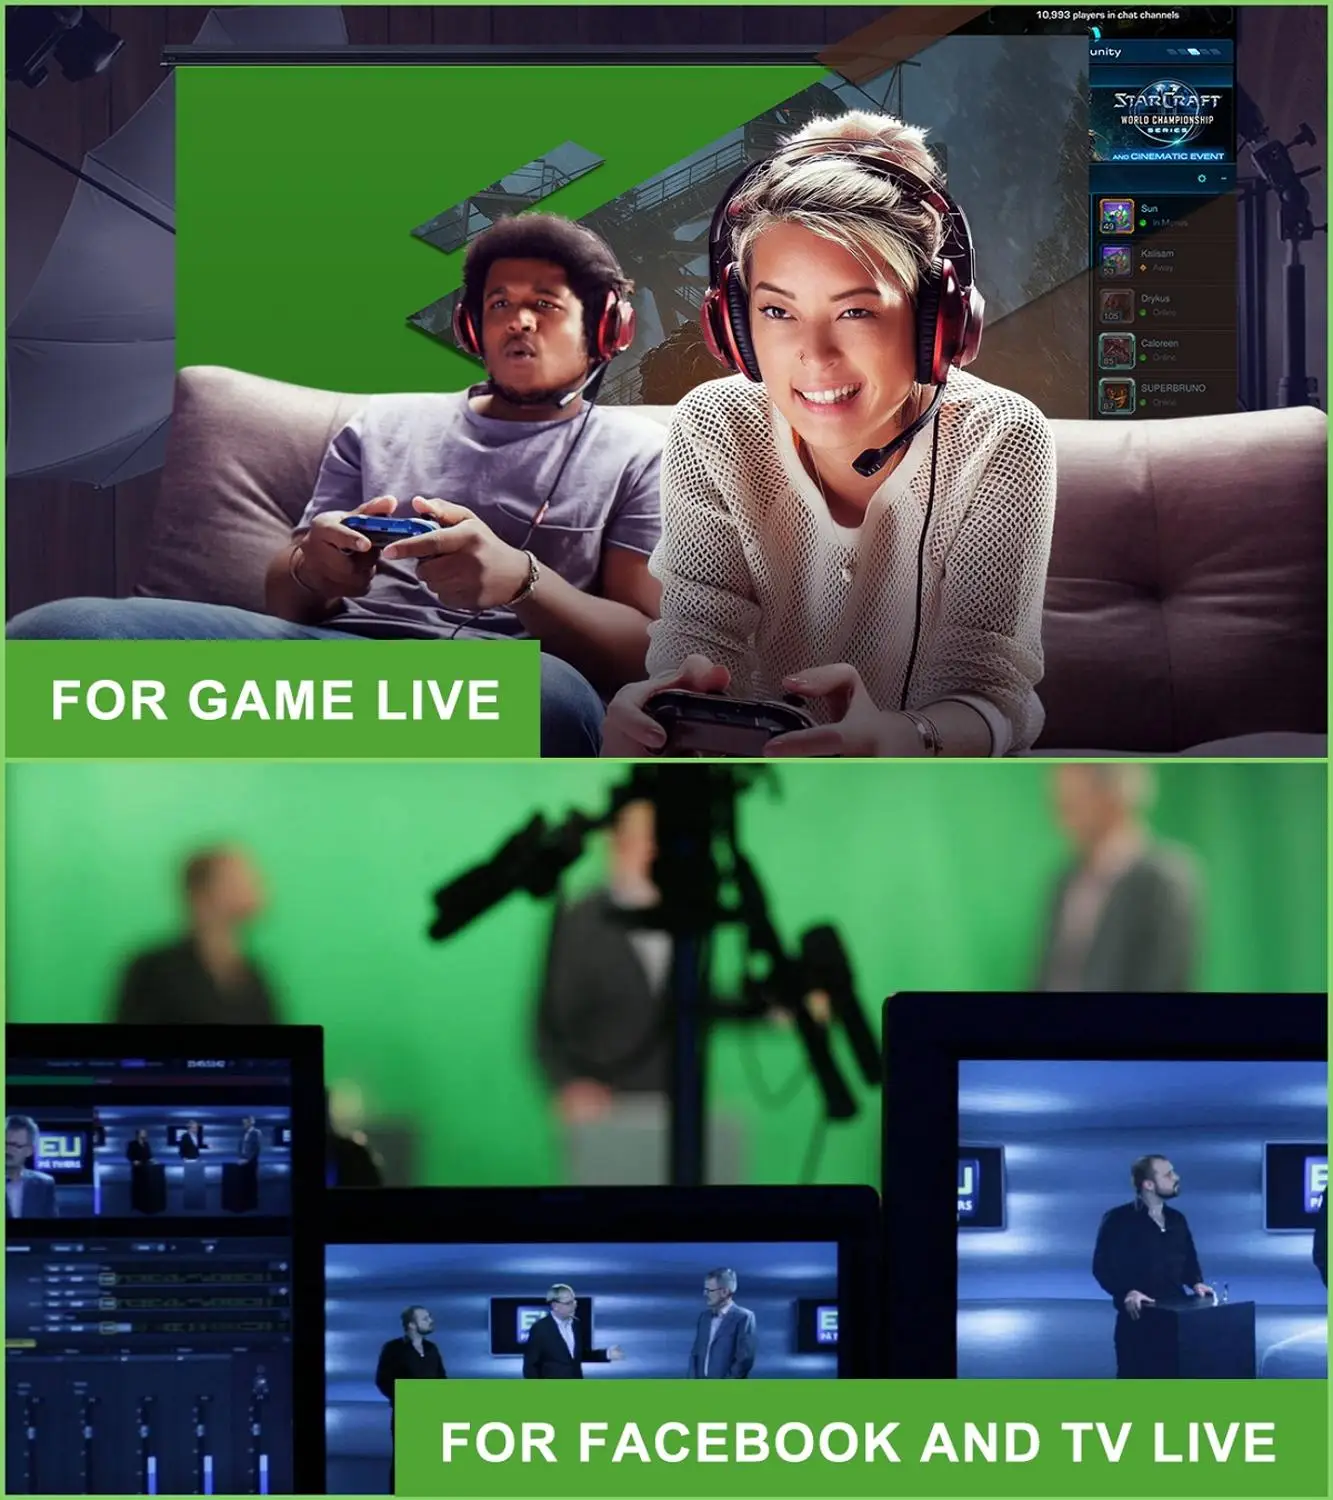 Portable Collapsible Elgato Green Screen With Stand - Chroma Key Green Screen For Gaming, Meetings.